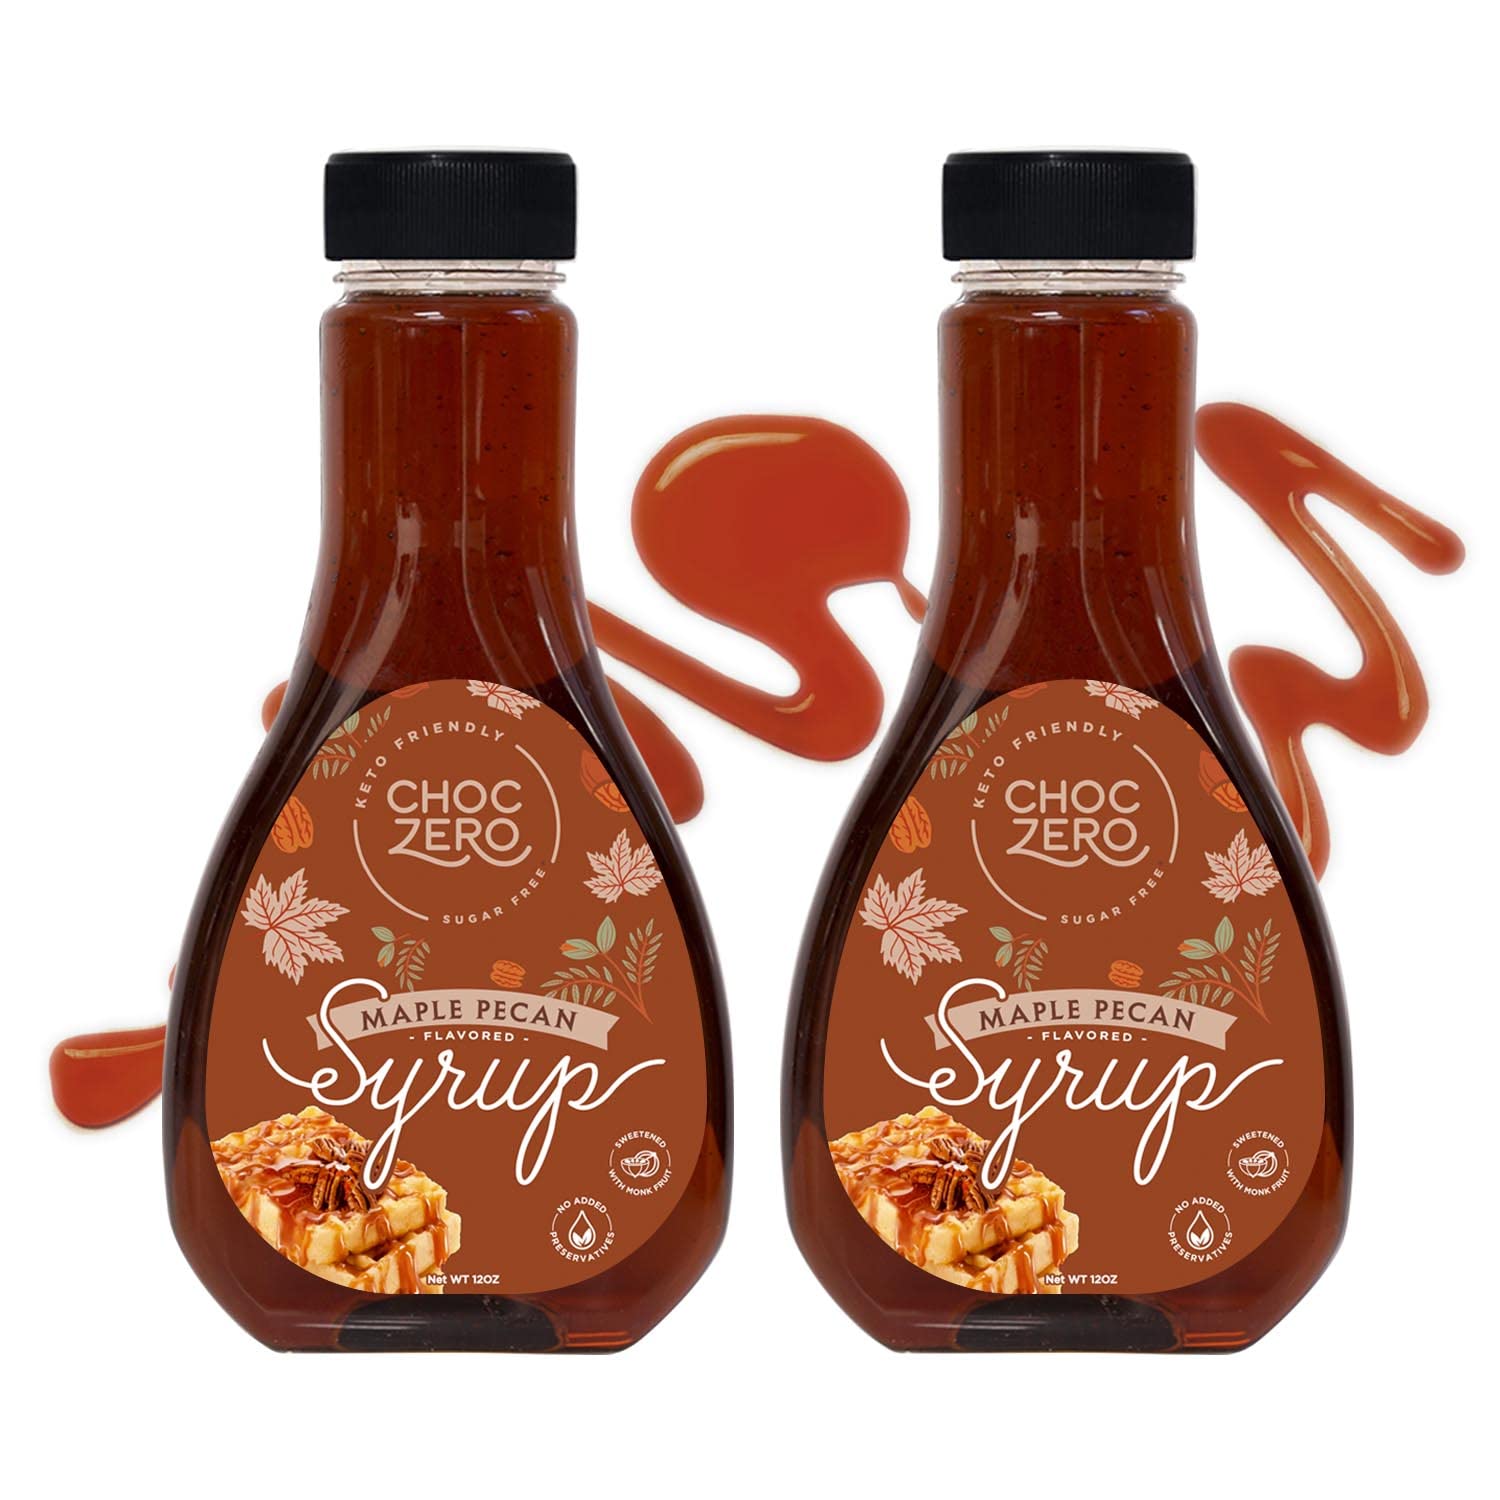 Book Cover Honest Syrup, Maple Pecan Sauce. Sugar free, Low Carb, No preservatives. Thick and Rich. Sugar Alcohol free, Gluten Free, Dessert and Breakfast Topping. 2 Bottles(2X12oz)